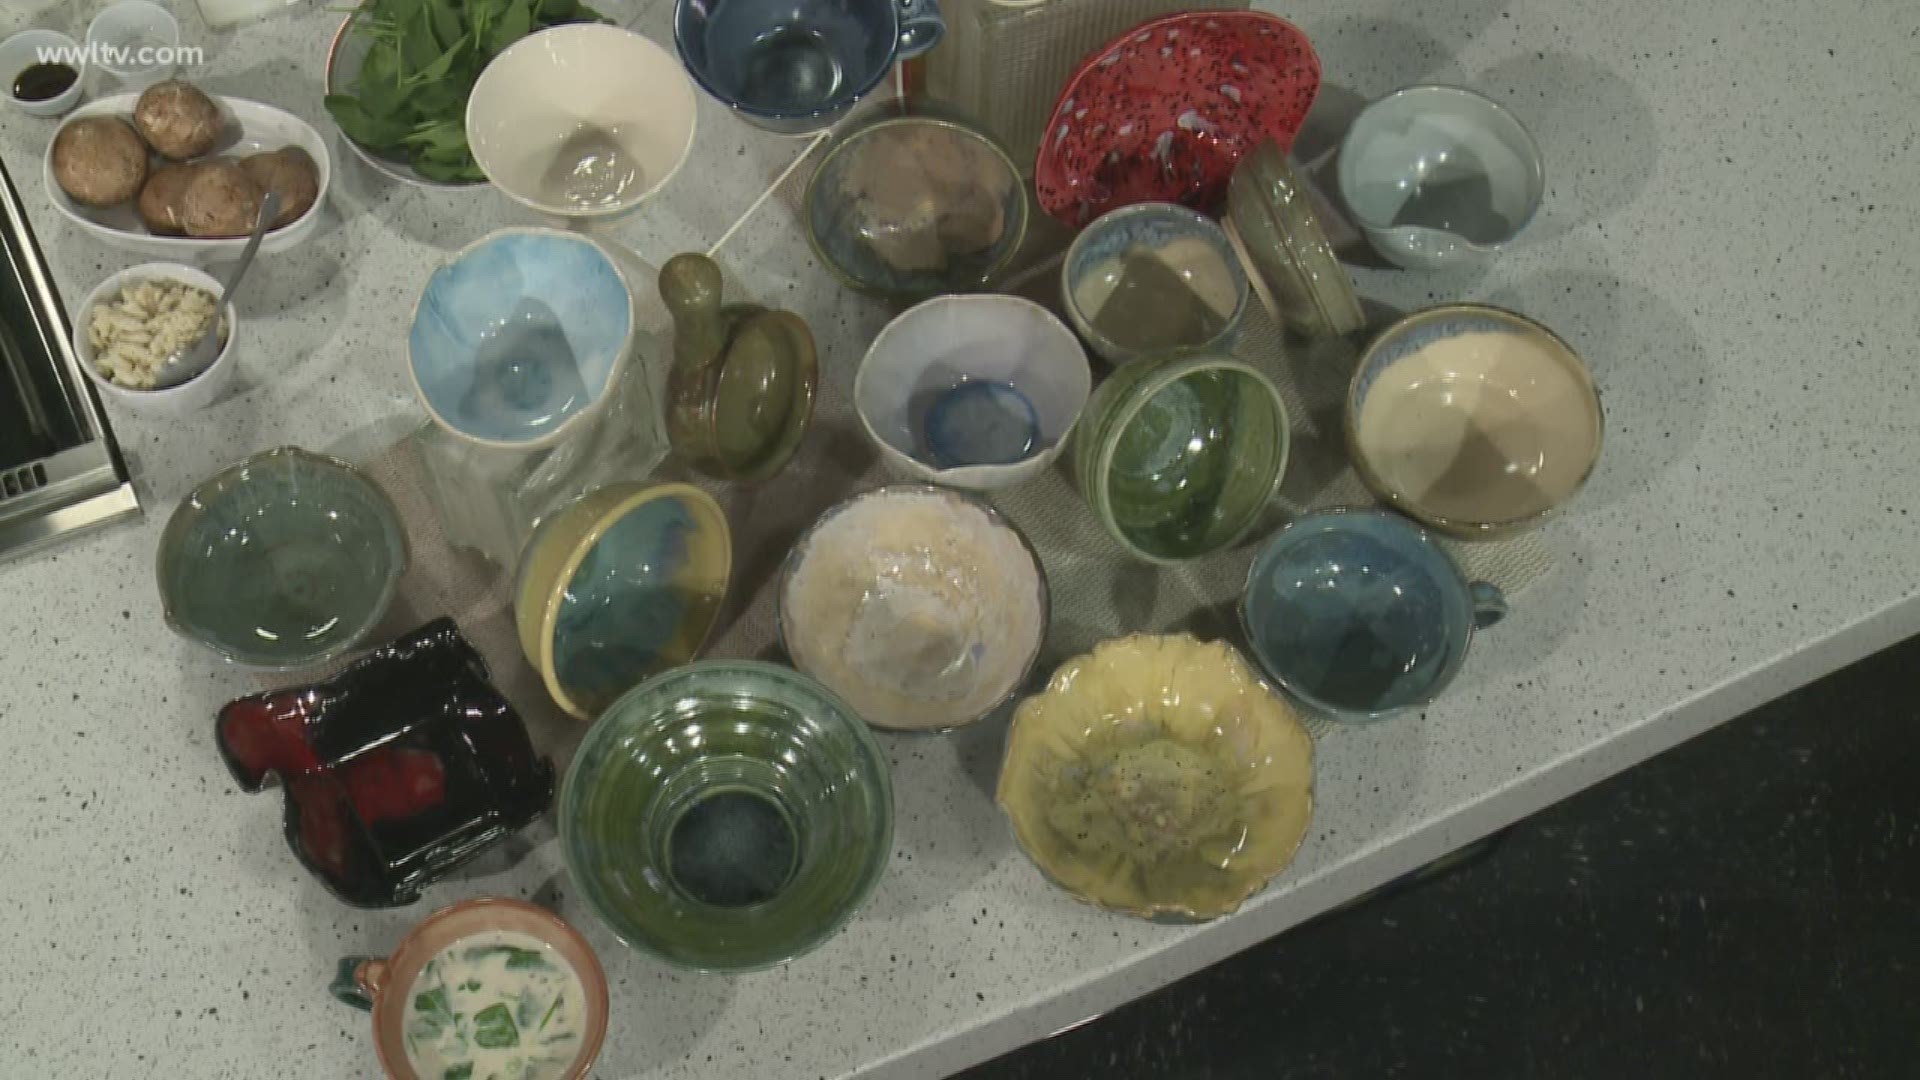 Nancy Moynan from Lulu's Restaurant is inviting you to Bay St.Louis to celebrate the 11th year of handmade bowls and delicious soup.